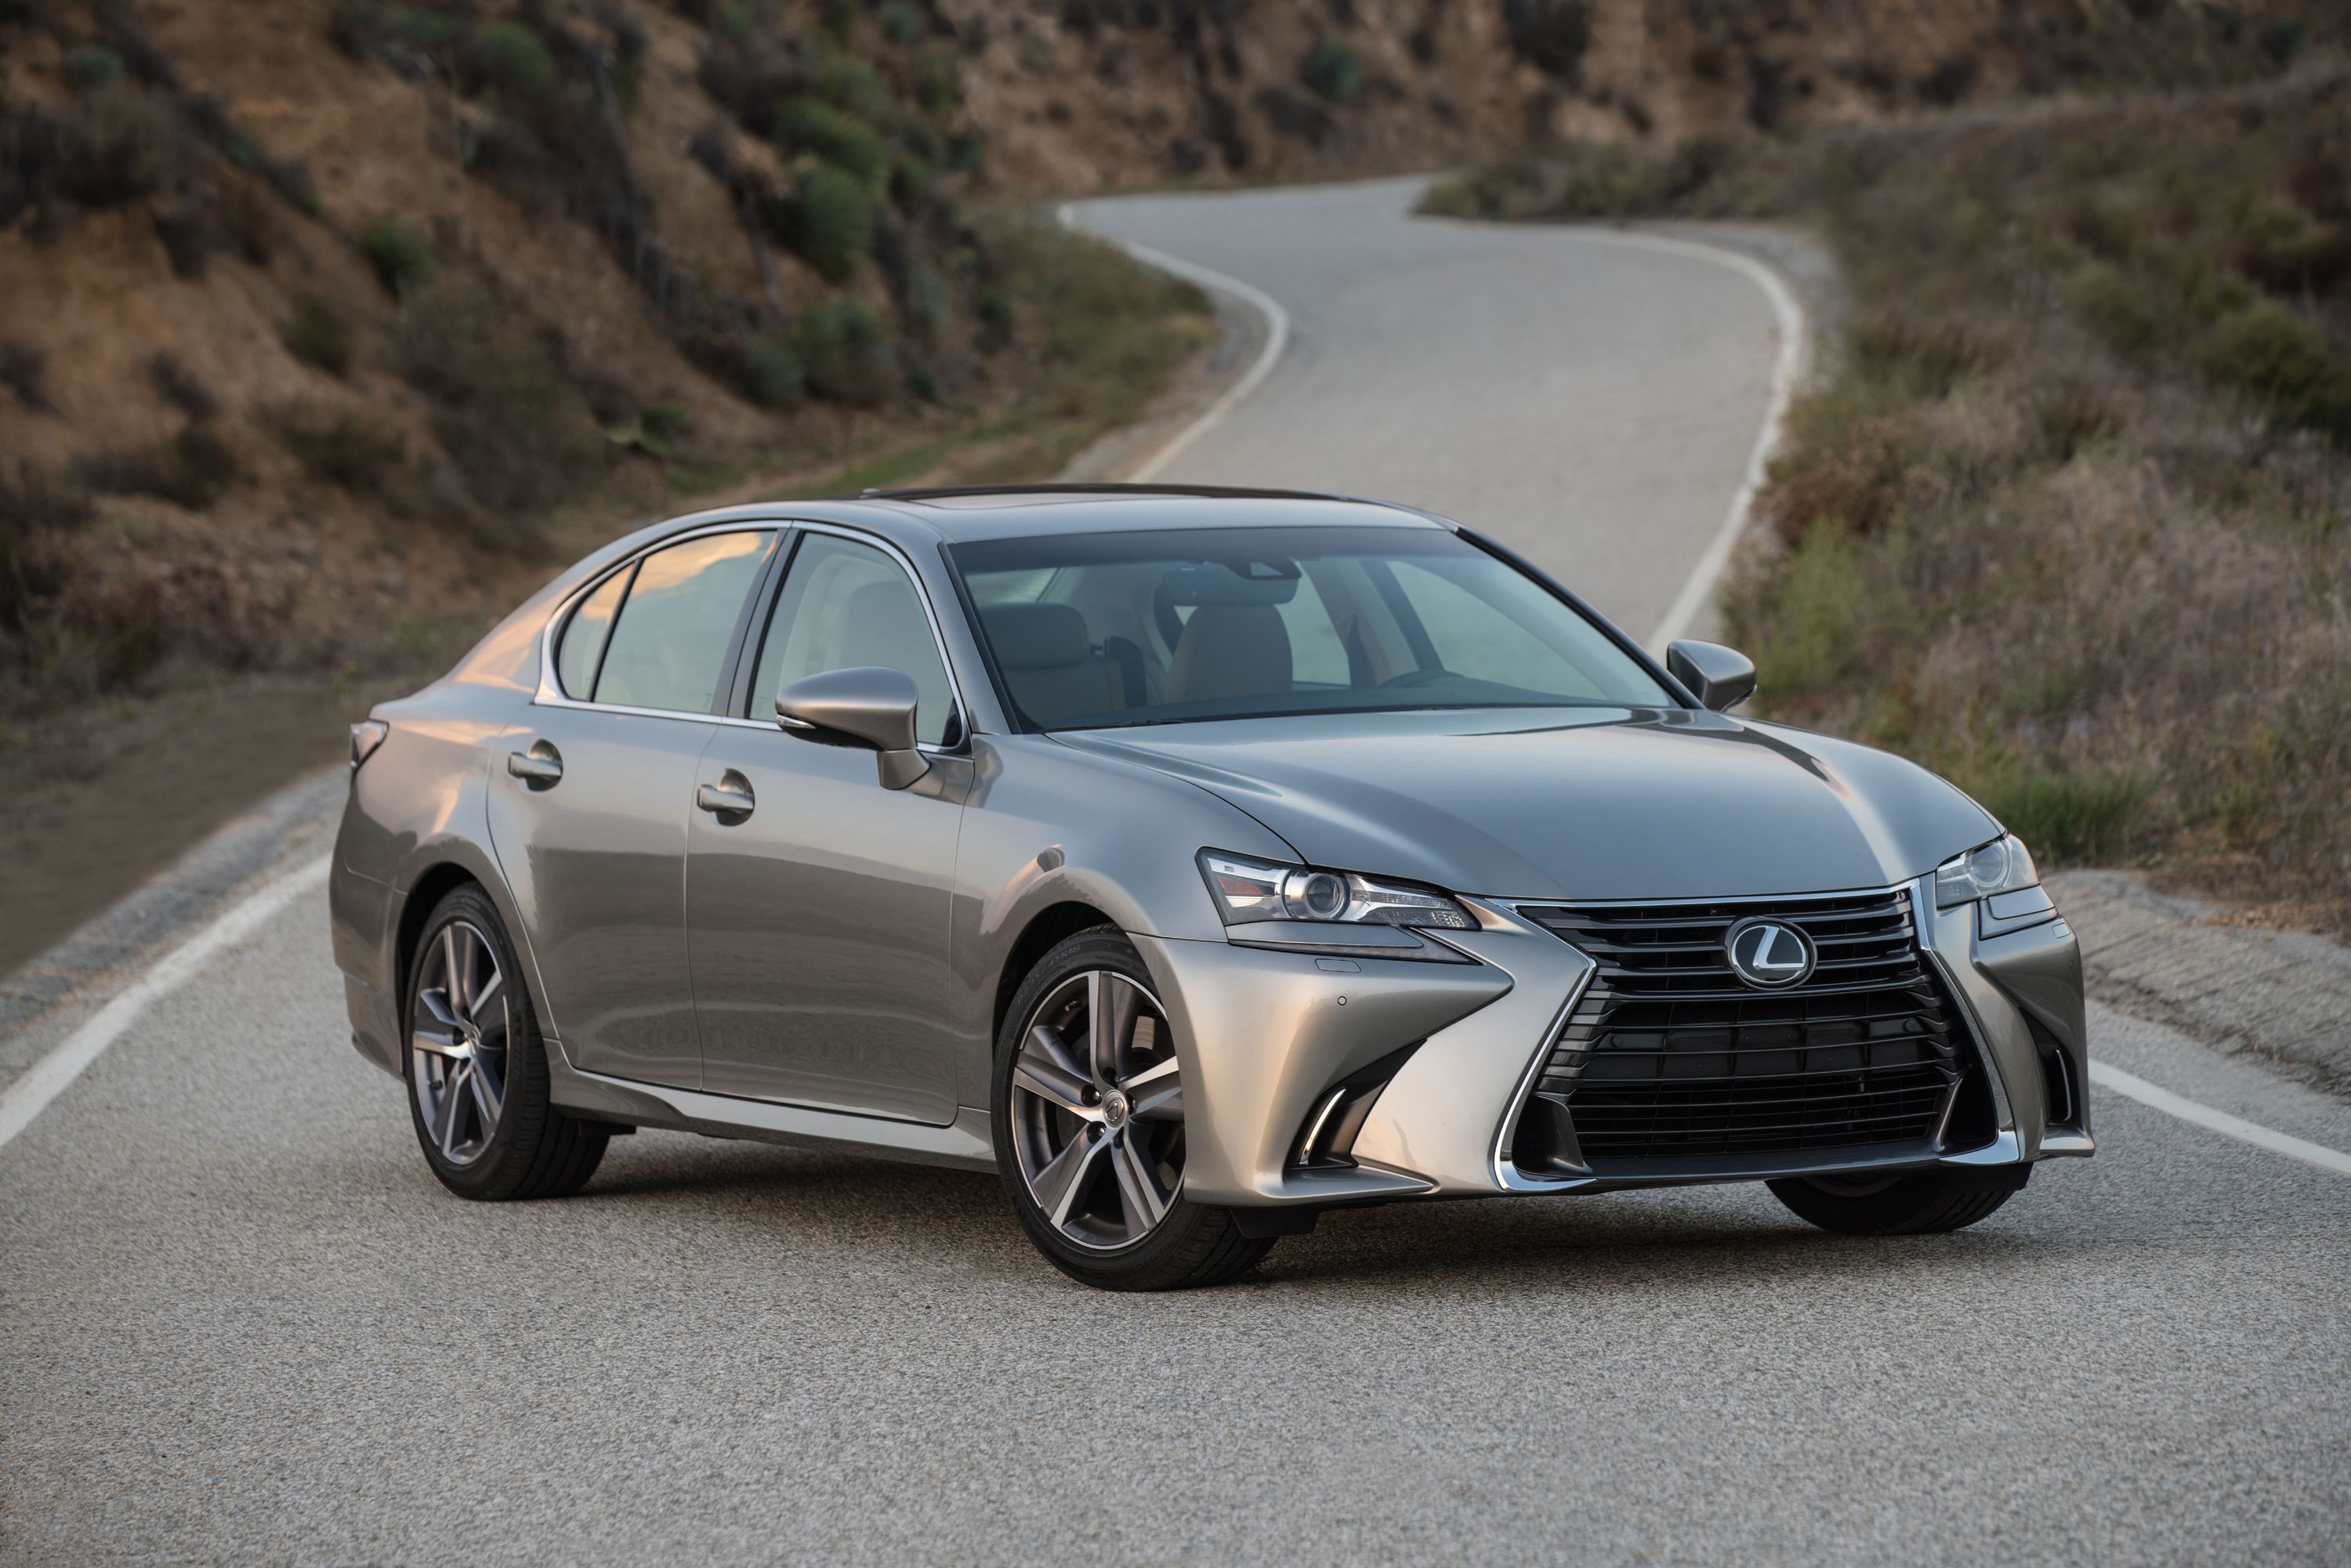 17 Lexus Gs Gs 350 F Sport Awd Features And Specs